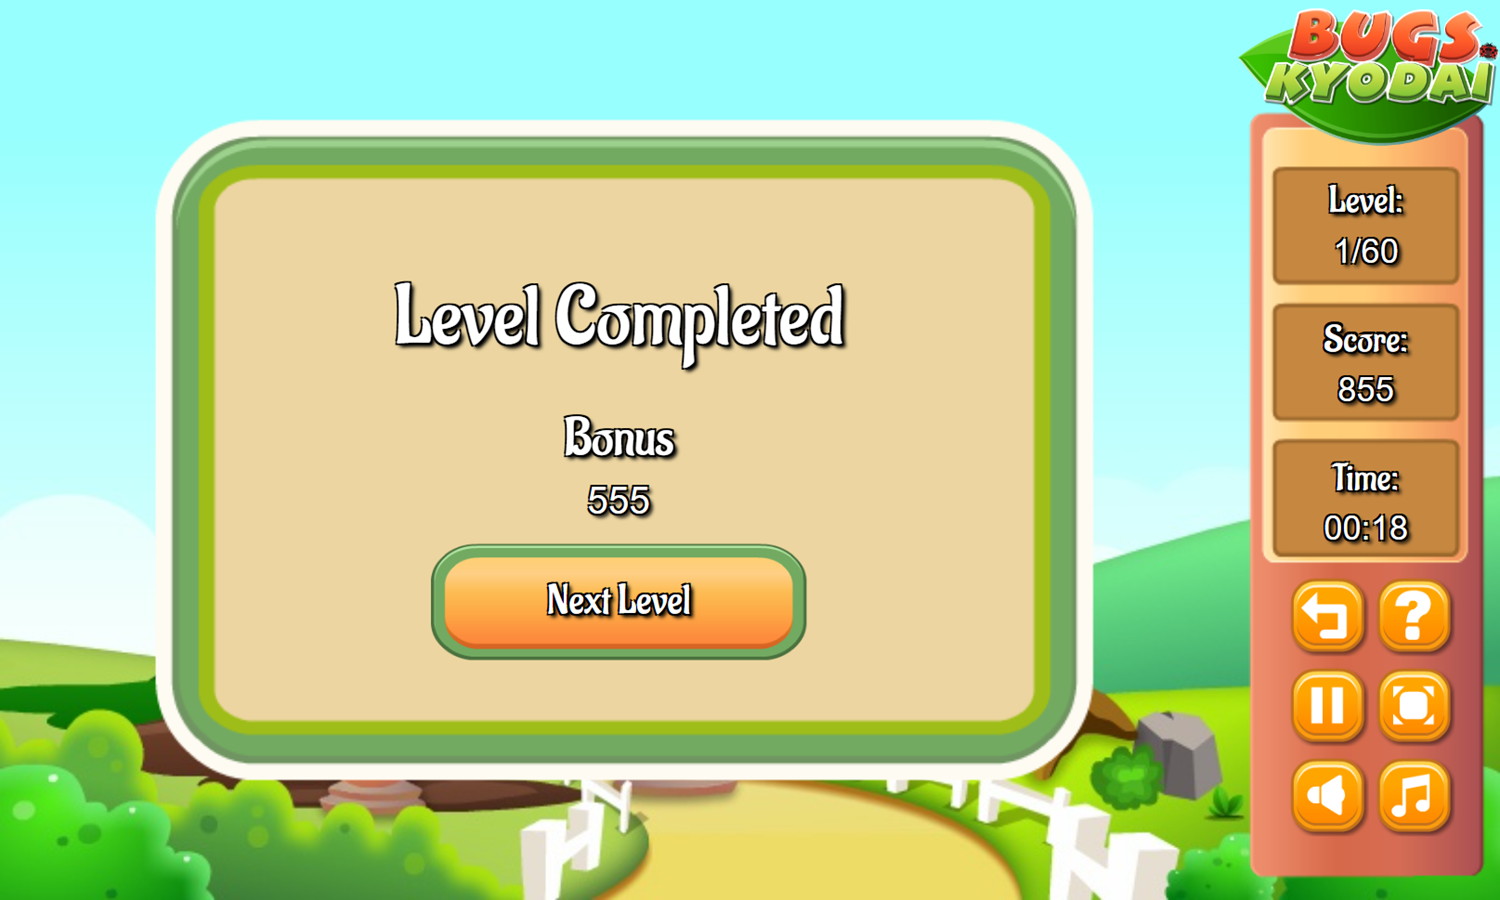 Bugs Kyodai Game Level Completed Screenshot.